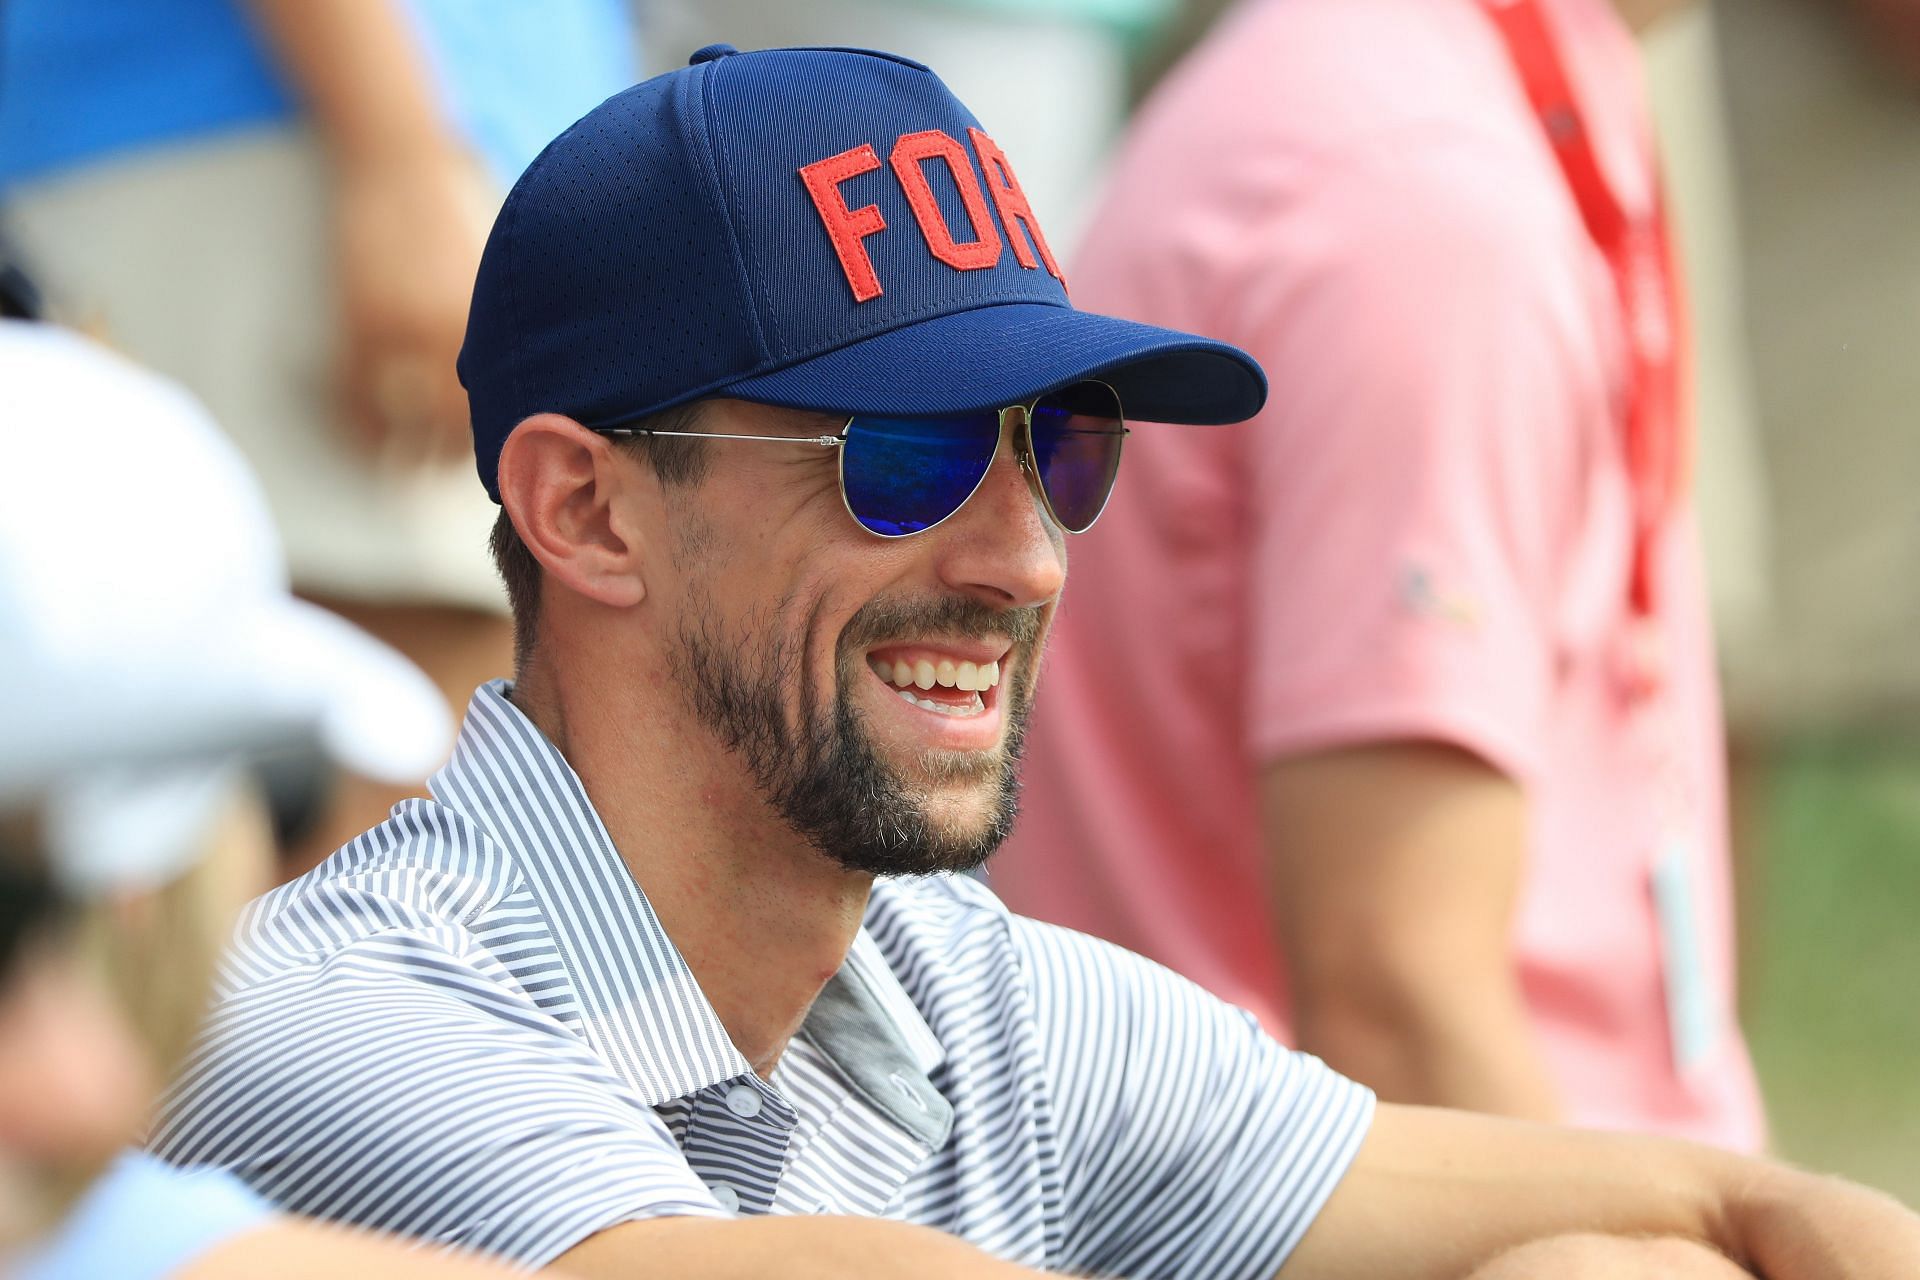 A smiling Michael Phelps spotted at the 2018 PGA Championship [Photo by Sam Greenwood/Getty Images]